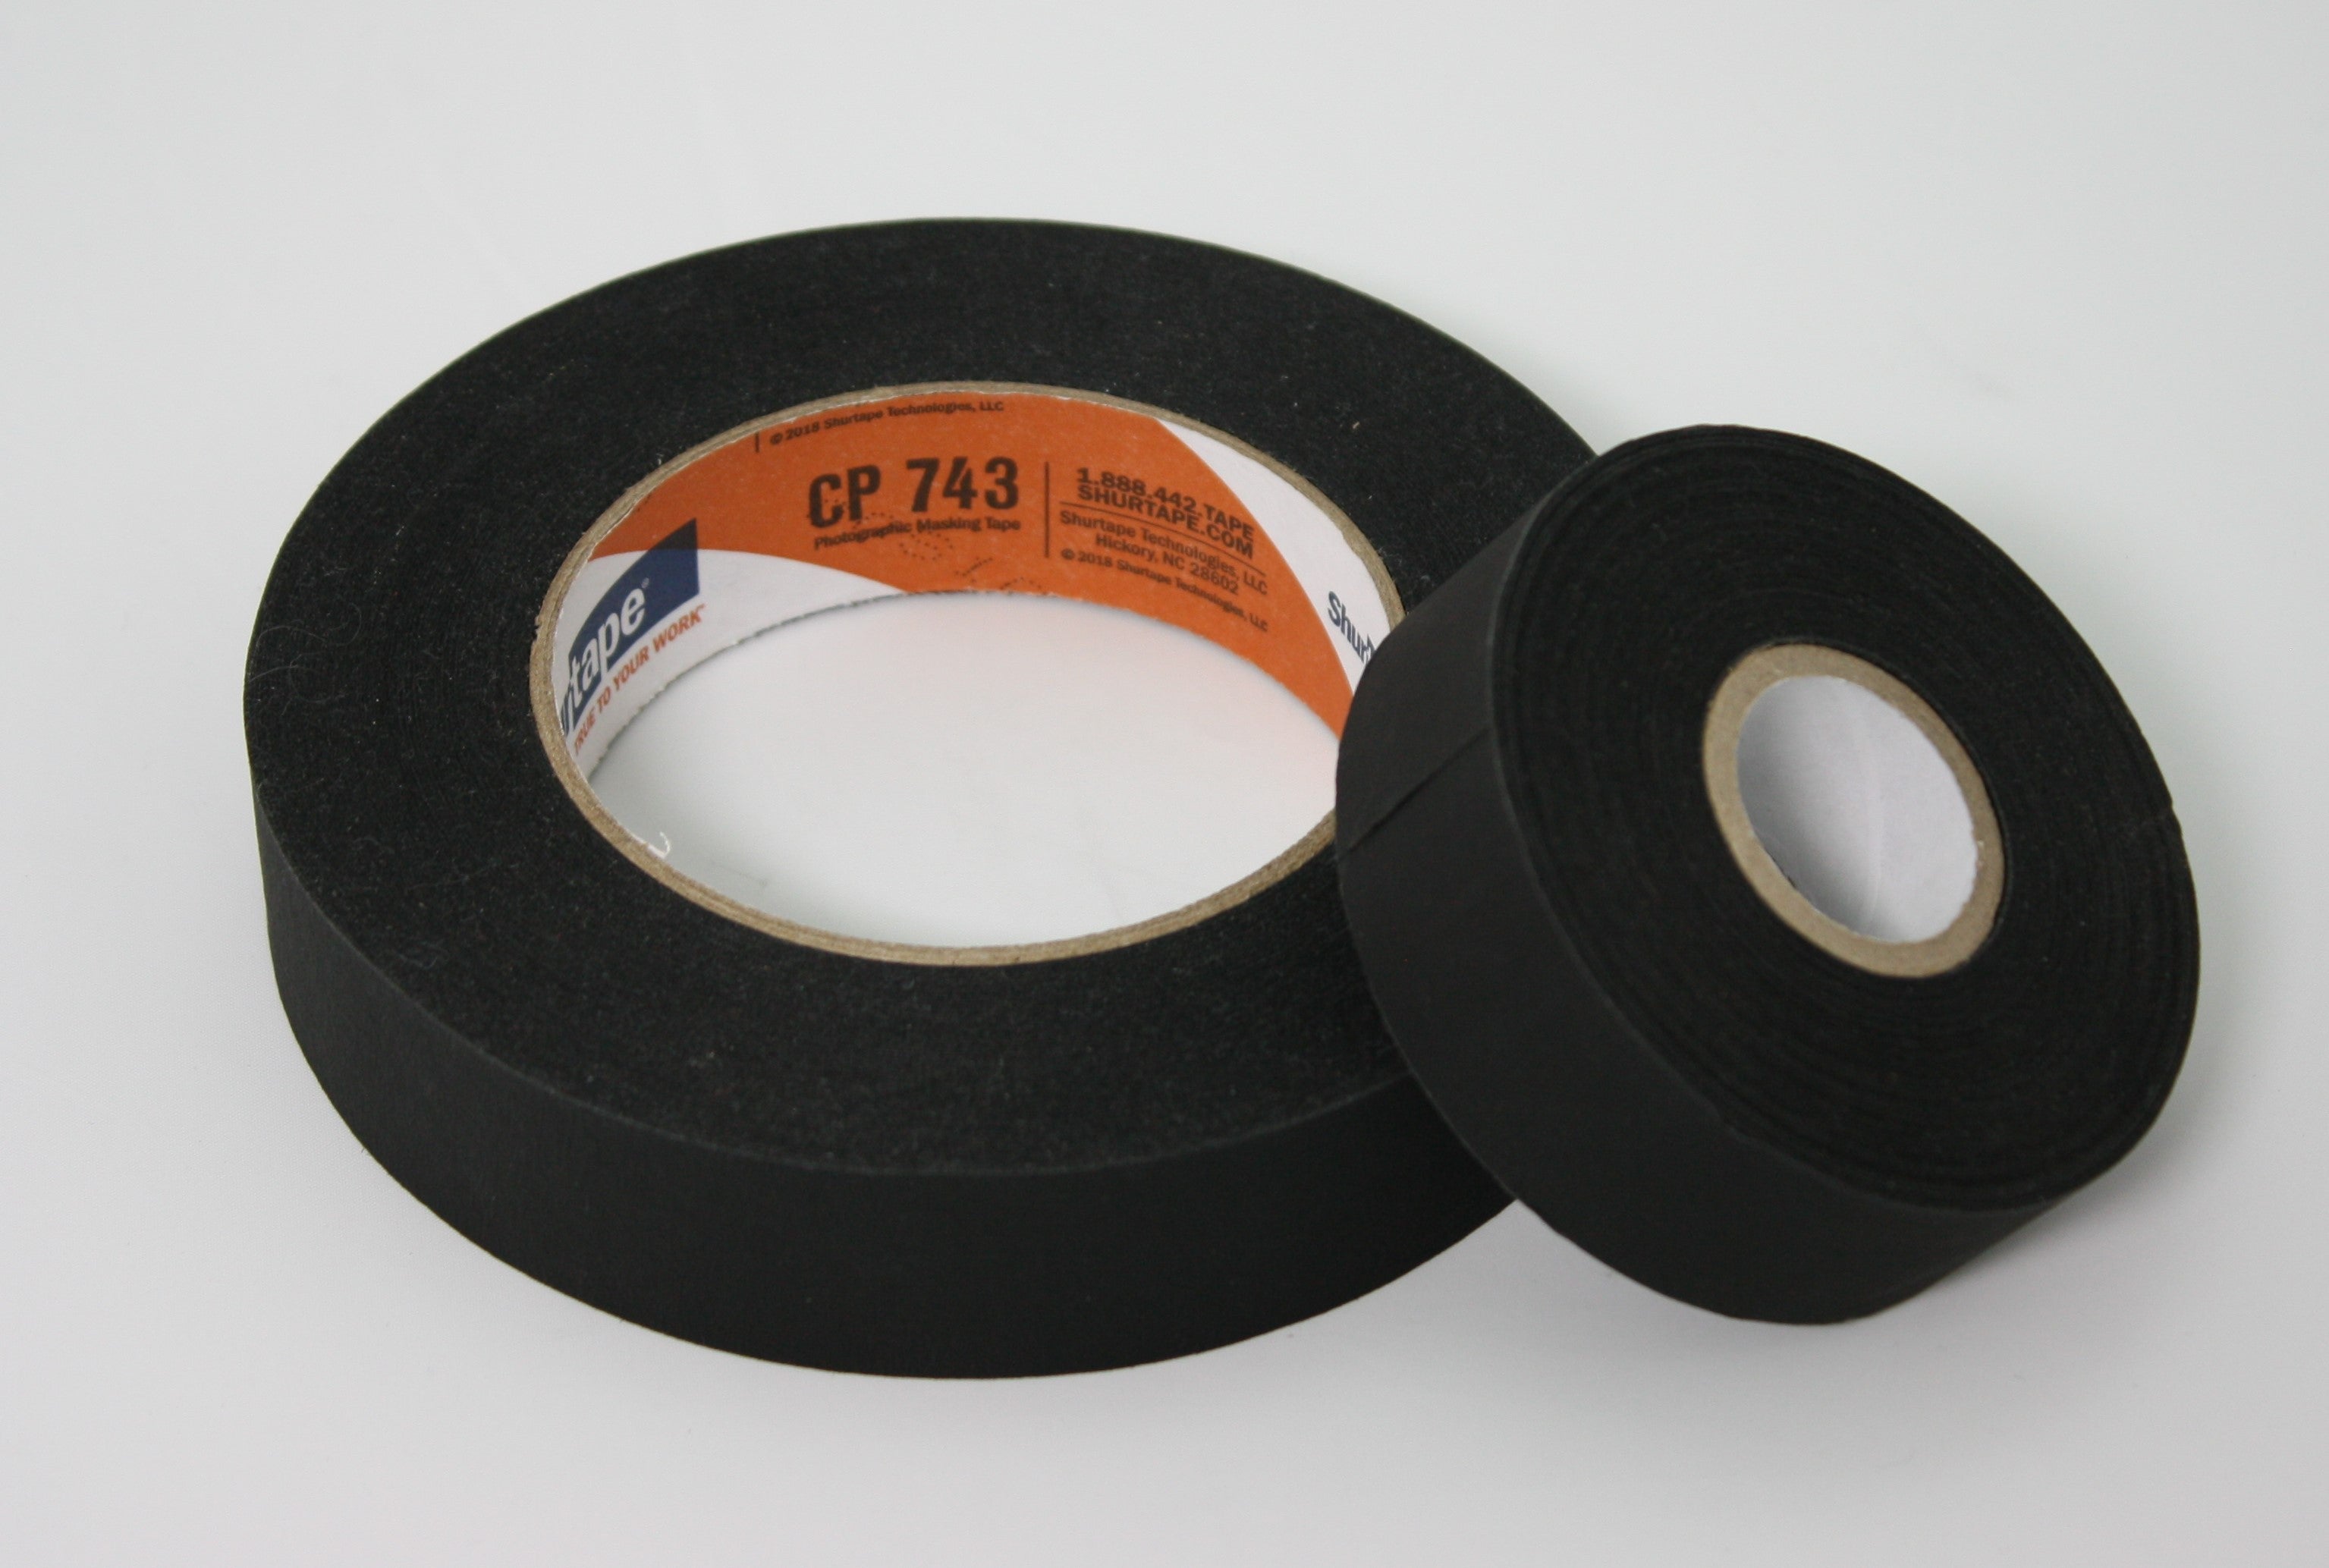 Shurtape CP-743 Matte Photo Tape, 1", small core roll and a 1" normal core roll side by side